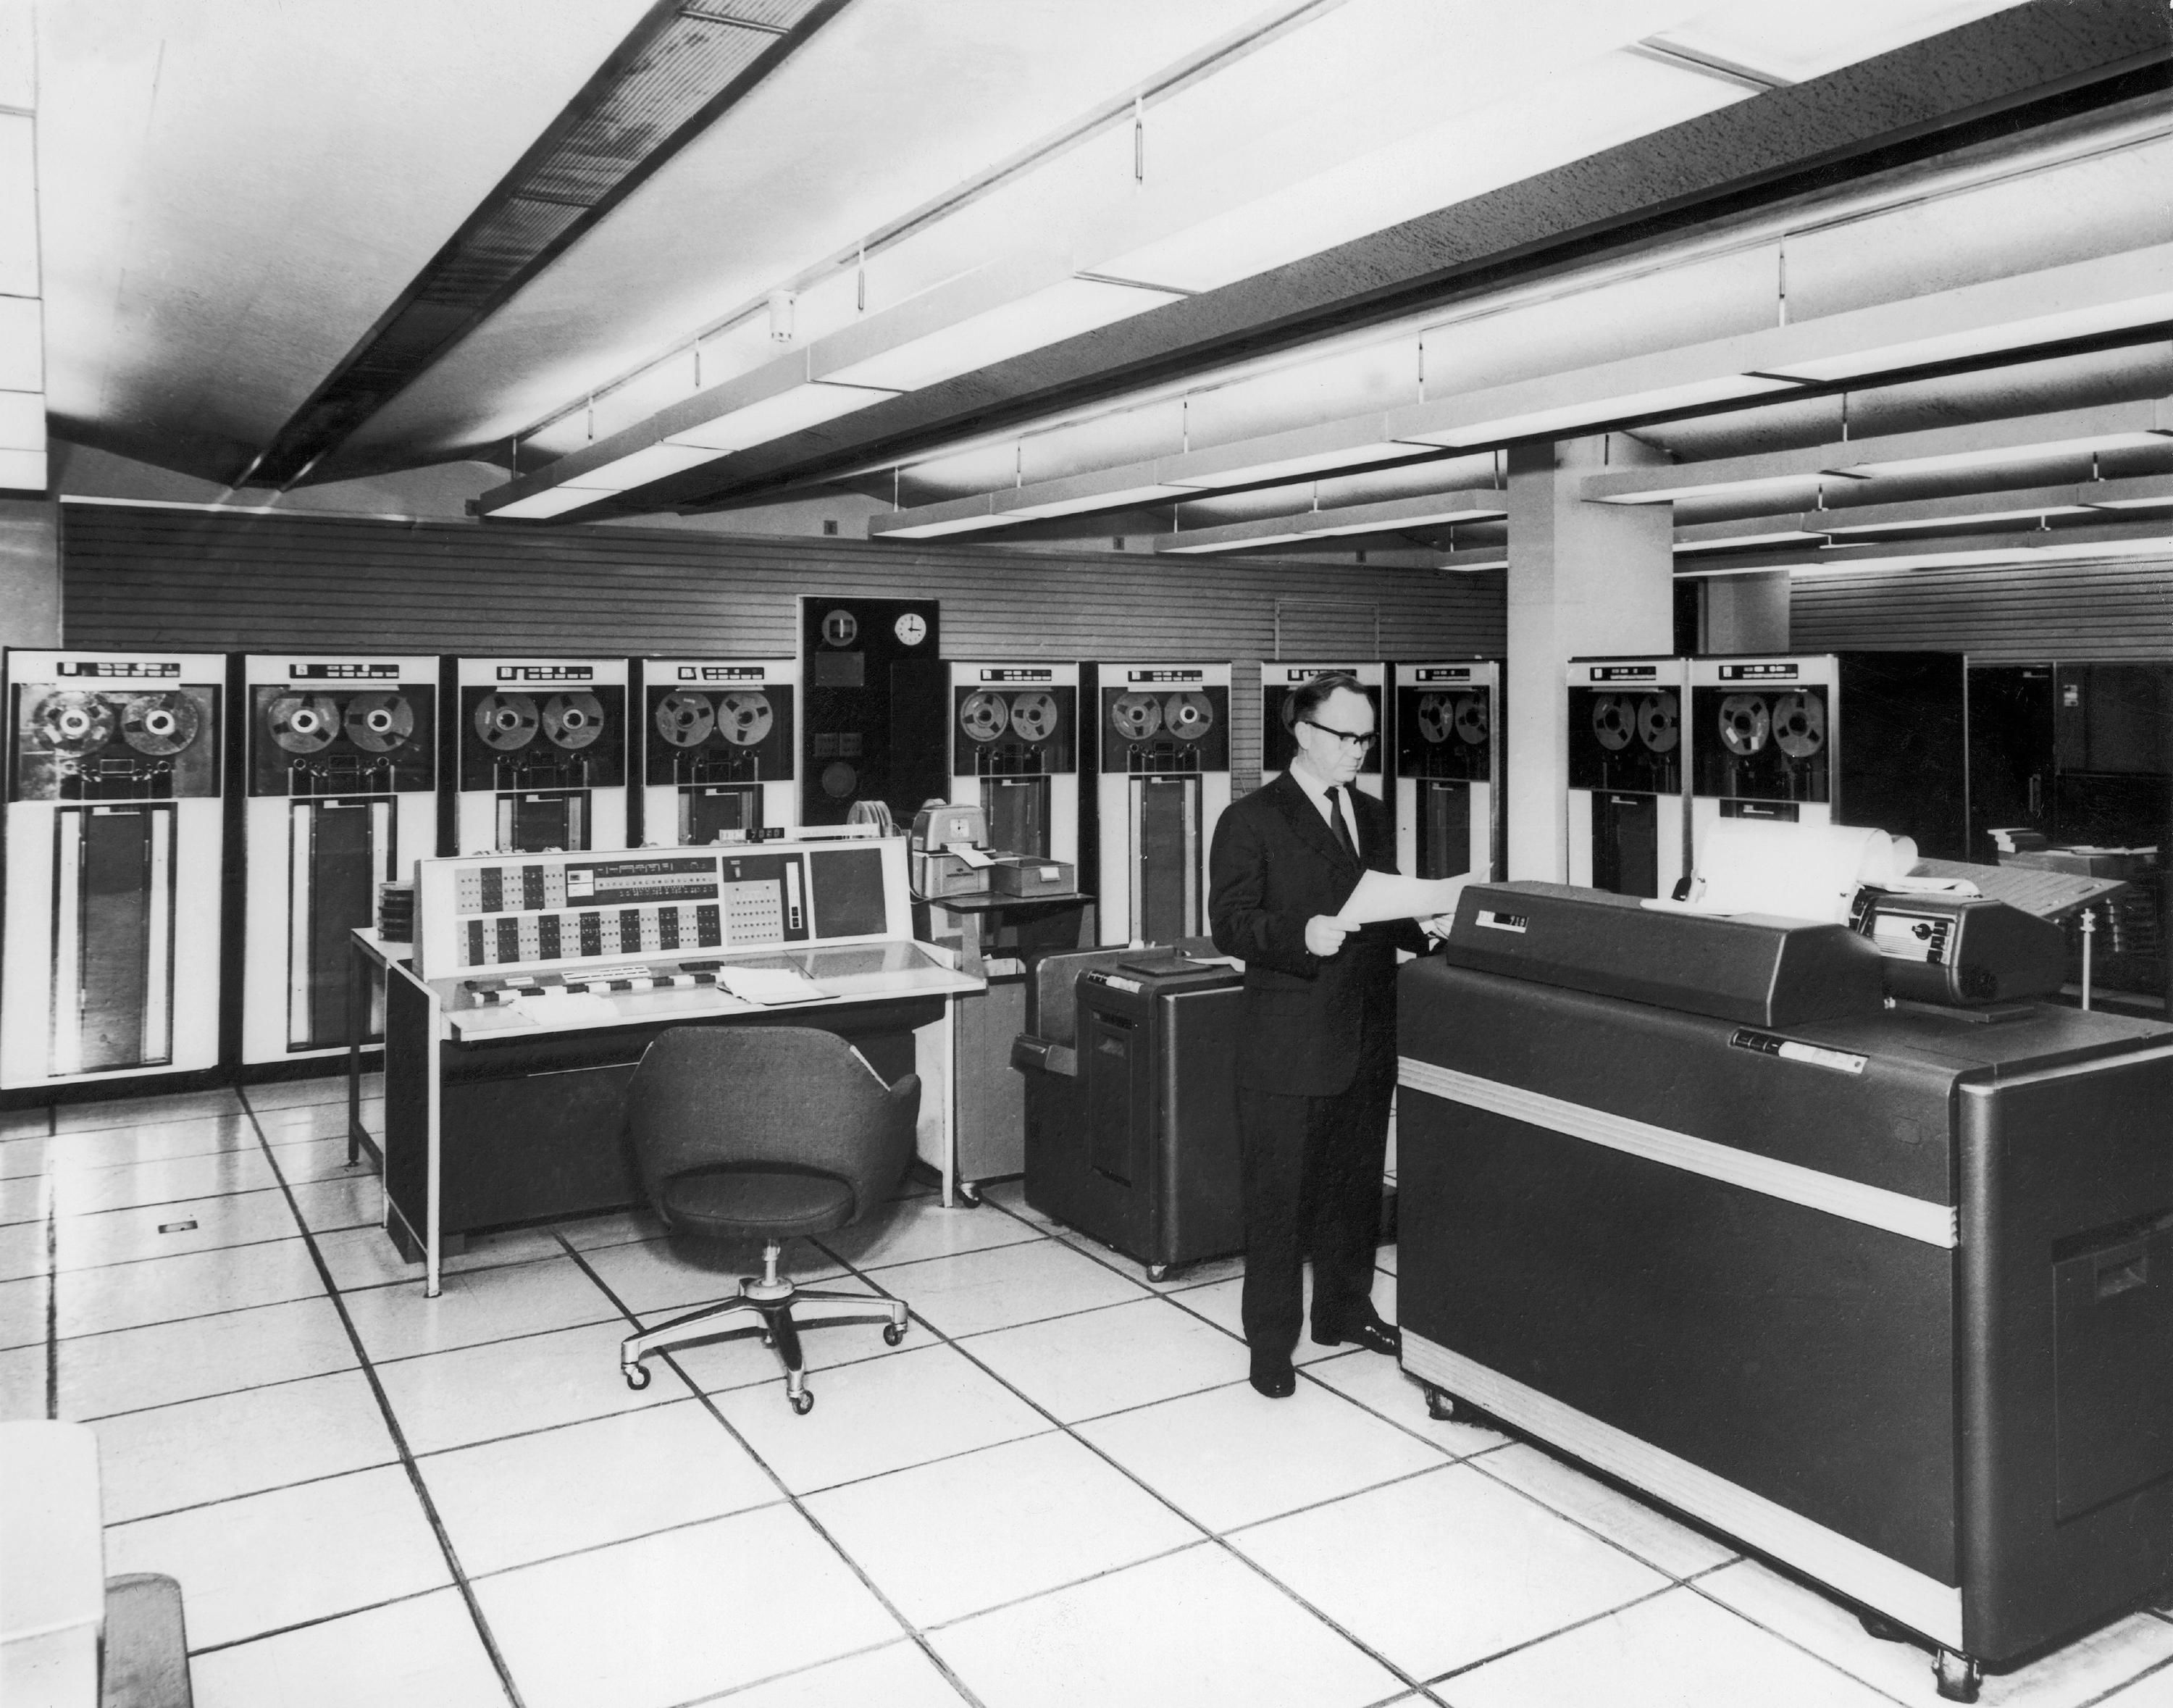 Black and white photograph of a man in a large room with mainframe computer elements lining the walls